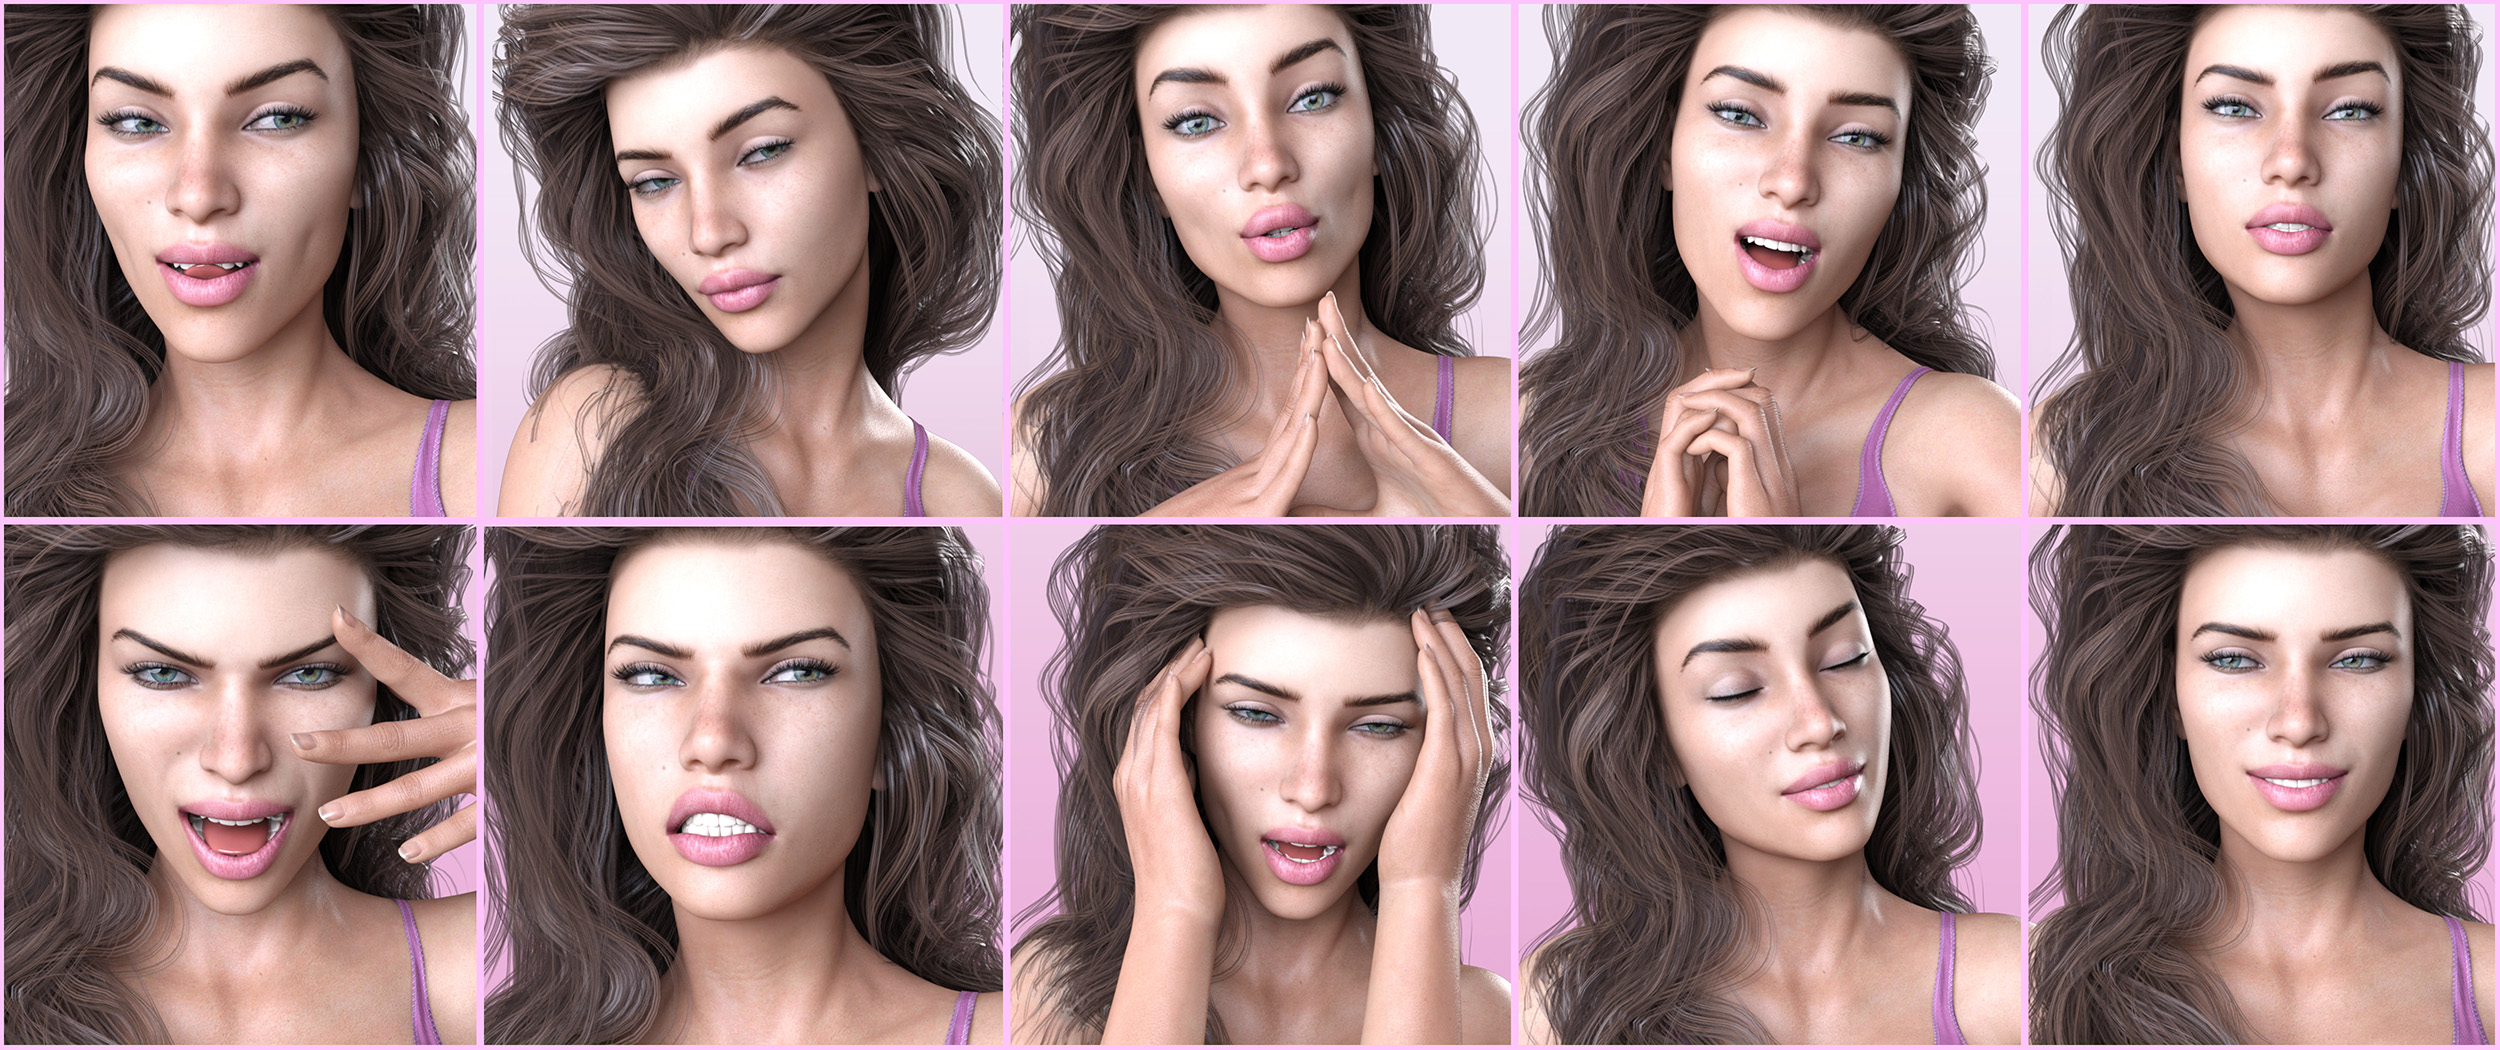 Z Naughty and Nice - Dialable and One-Click Expressions for Genesis 3 and 8 Female by: Zeddicuss, 3D Models by Daz 3D